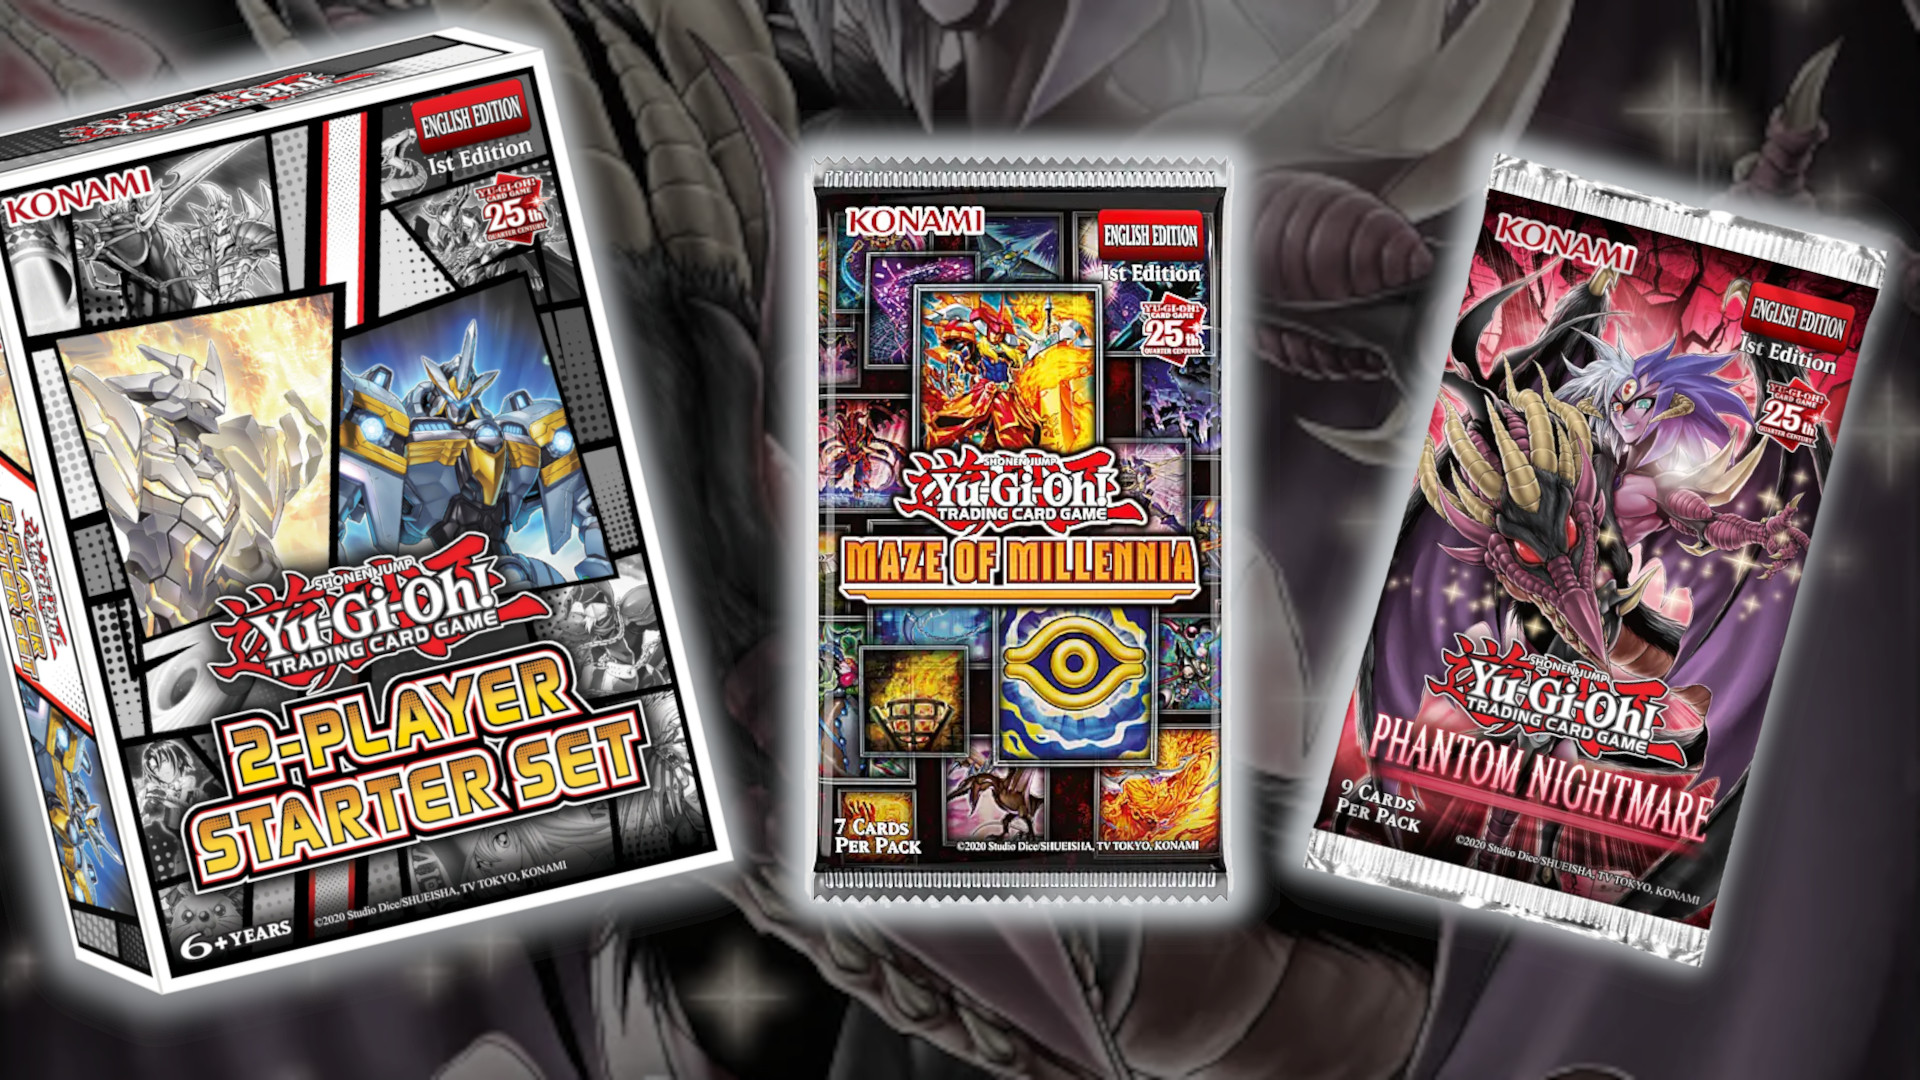 Booster Pack Yu-Gi-Oh! TCG Legacy of Destruction